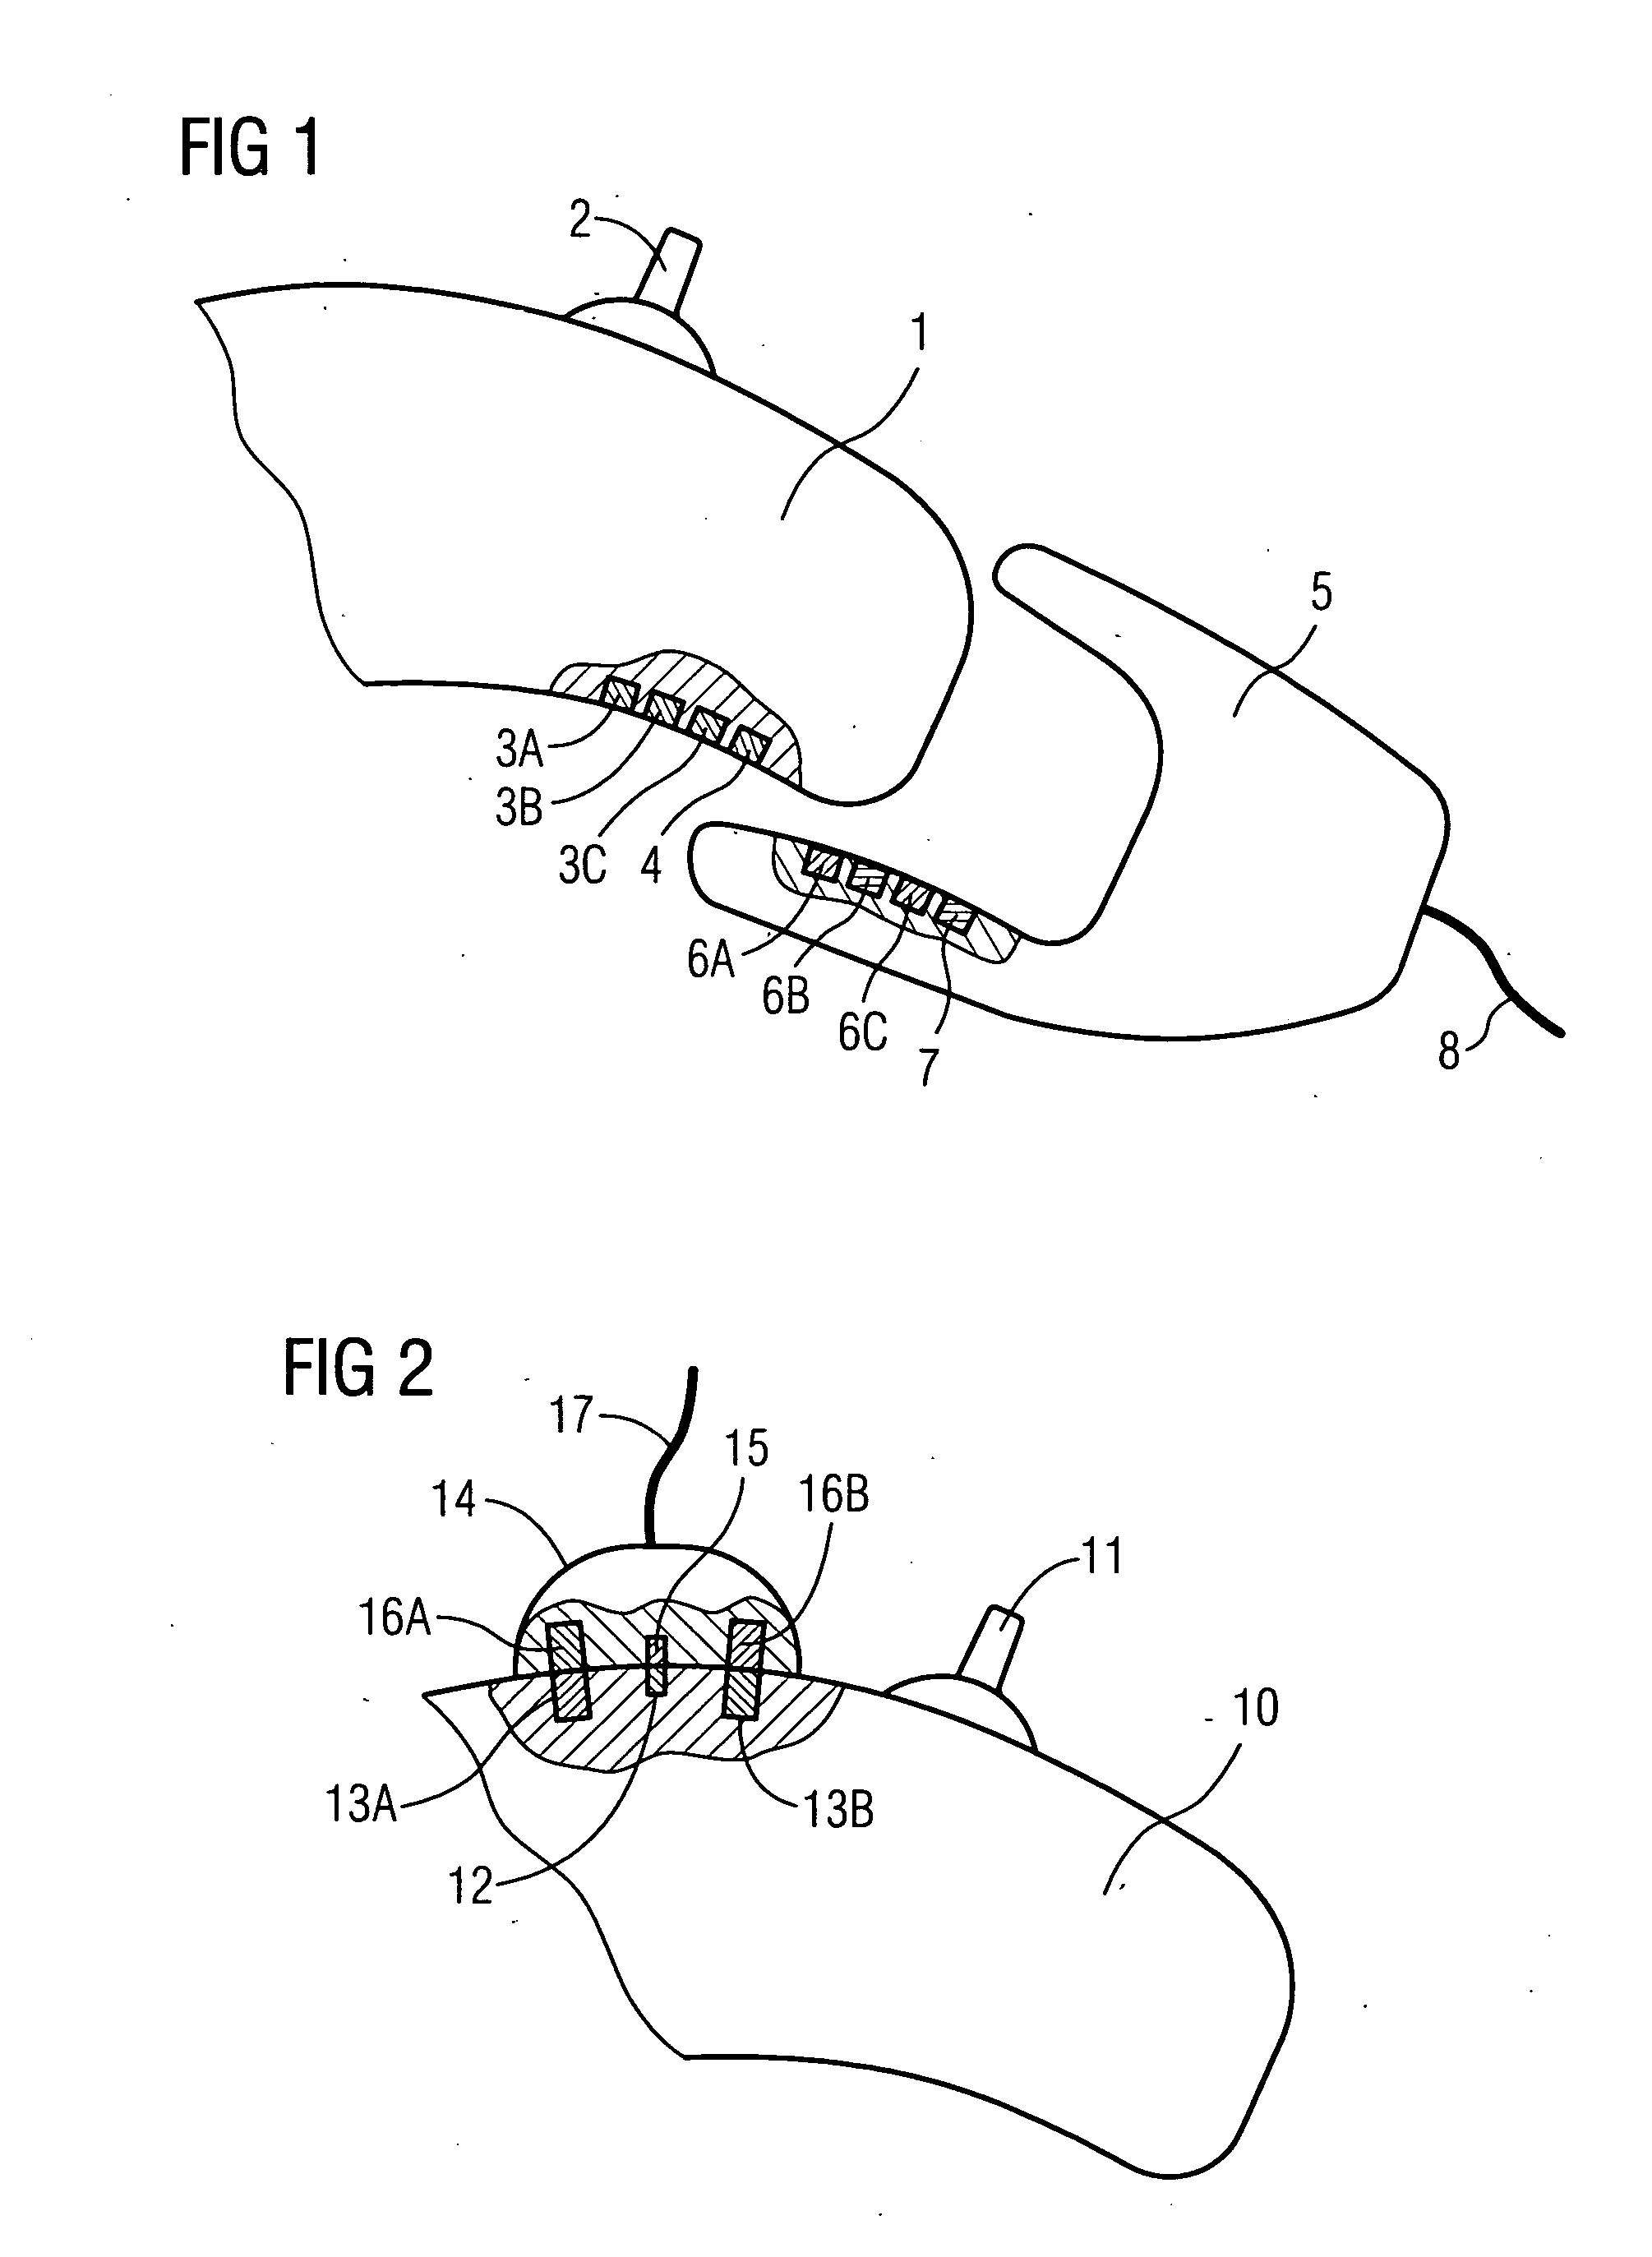 Interface facility for signal transmission between a hearing aid device and an external device